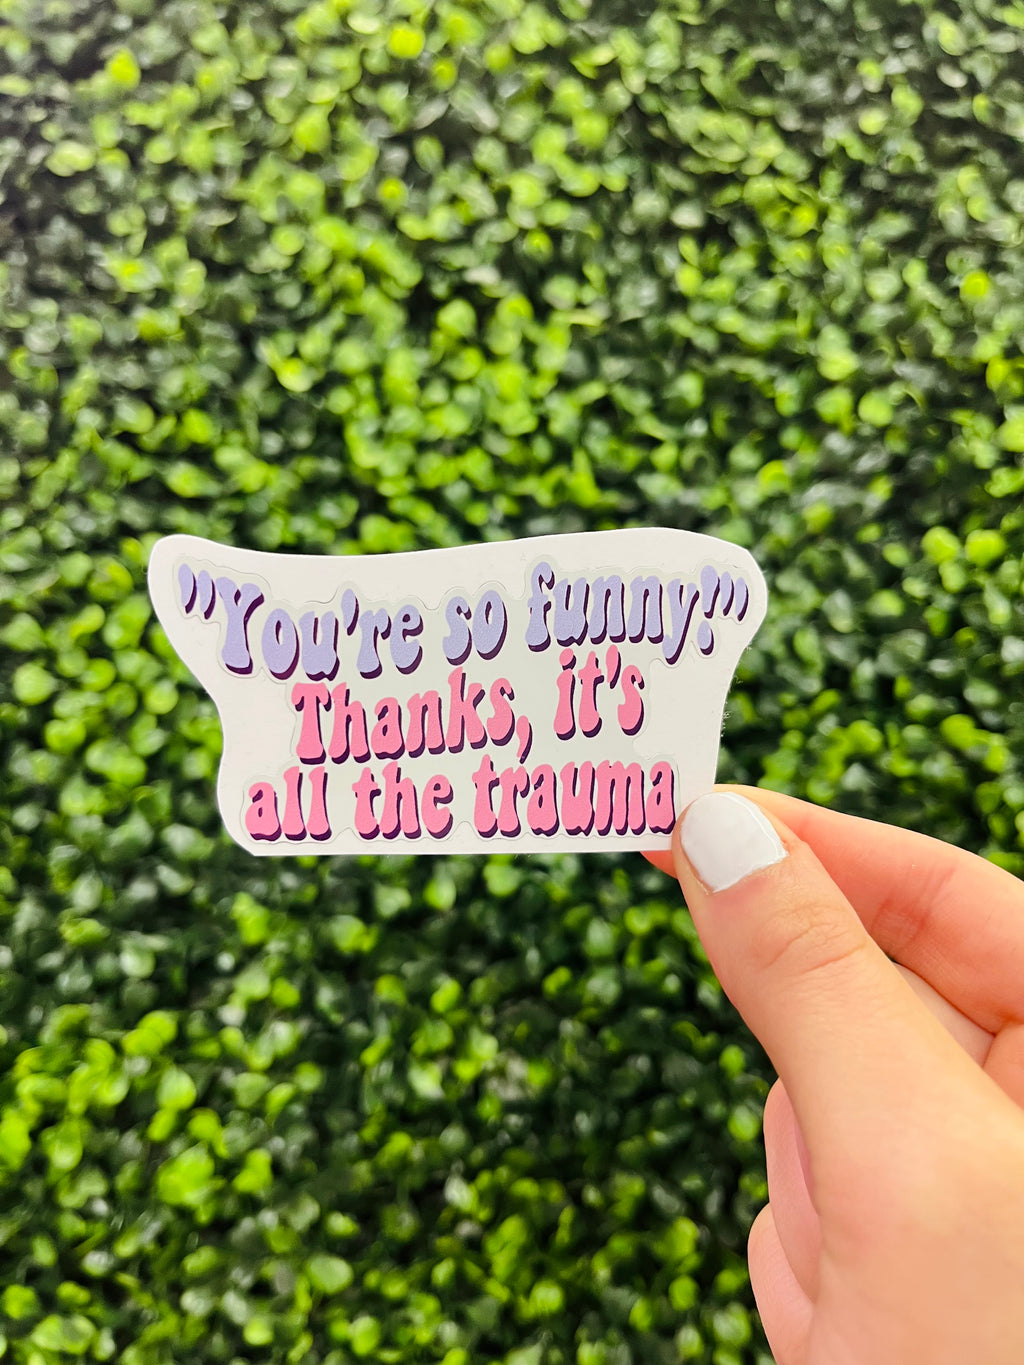 Say goodbye to bottled trauma with the Thanks, It's All the Trauma Sticker! Just stick this fun and sassy sticker onto any water bottle or laptop and feel the stress melt away. A guaranteed laughter-inducing combo of humor and convenience! After all, you're so funny - thanks, it's all the trauma!